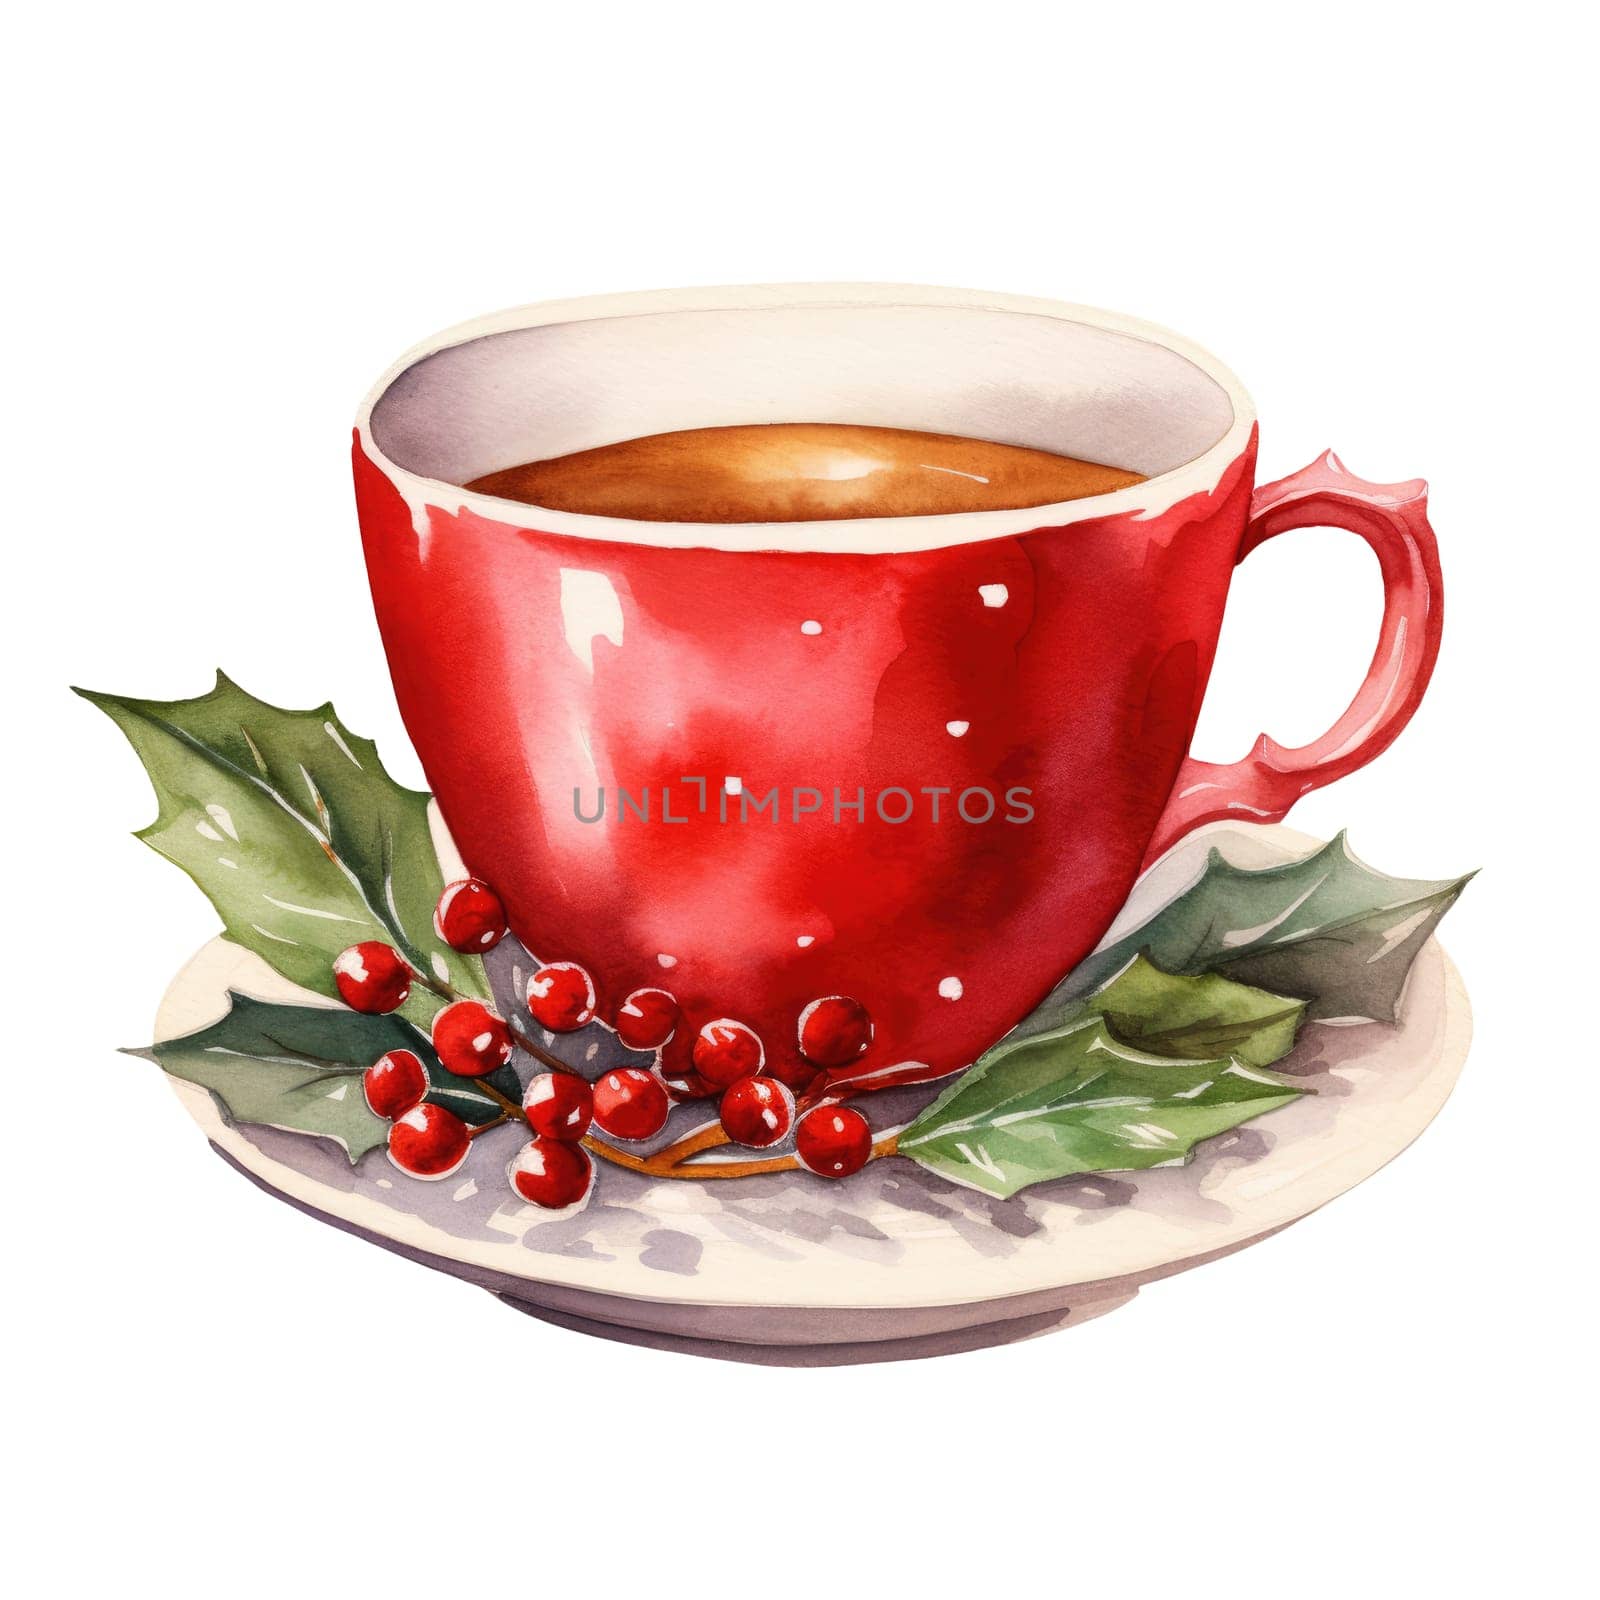 Watercolor Christmas illustration with red cup and winter hot drinks by natali_brill